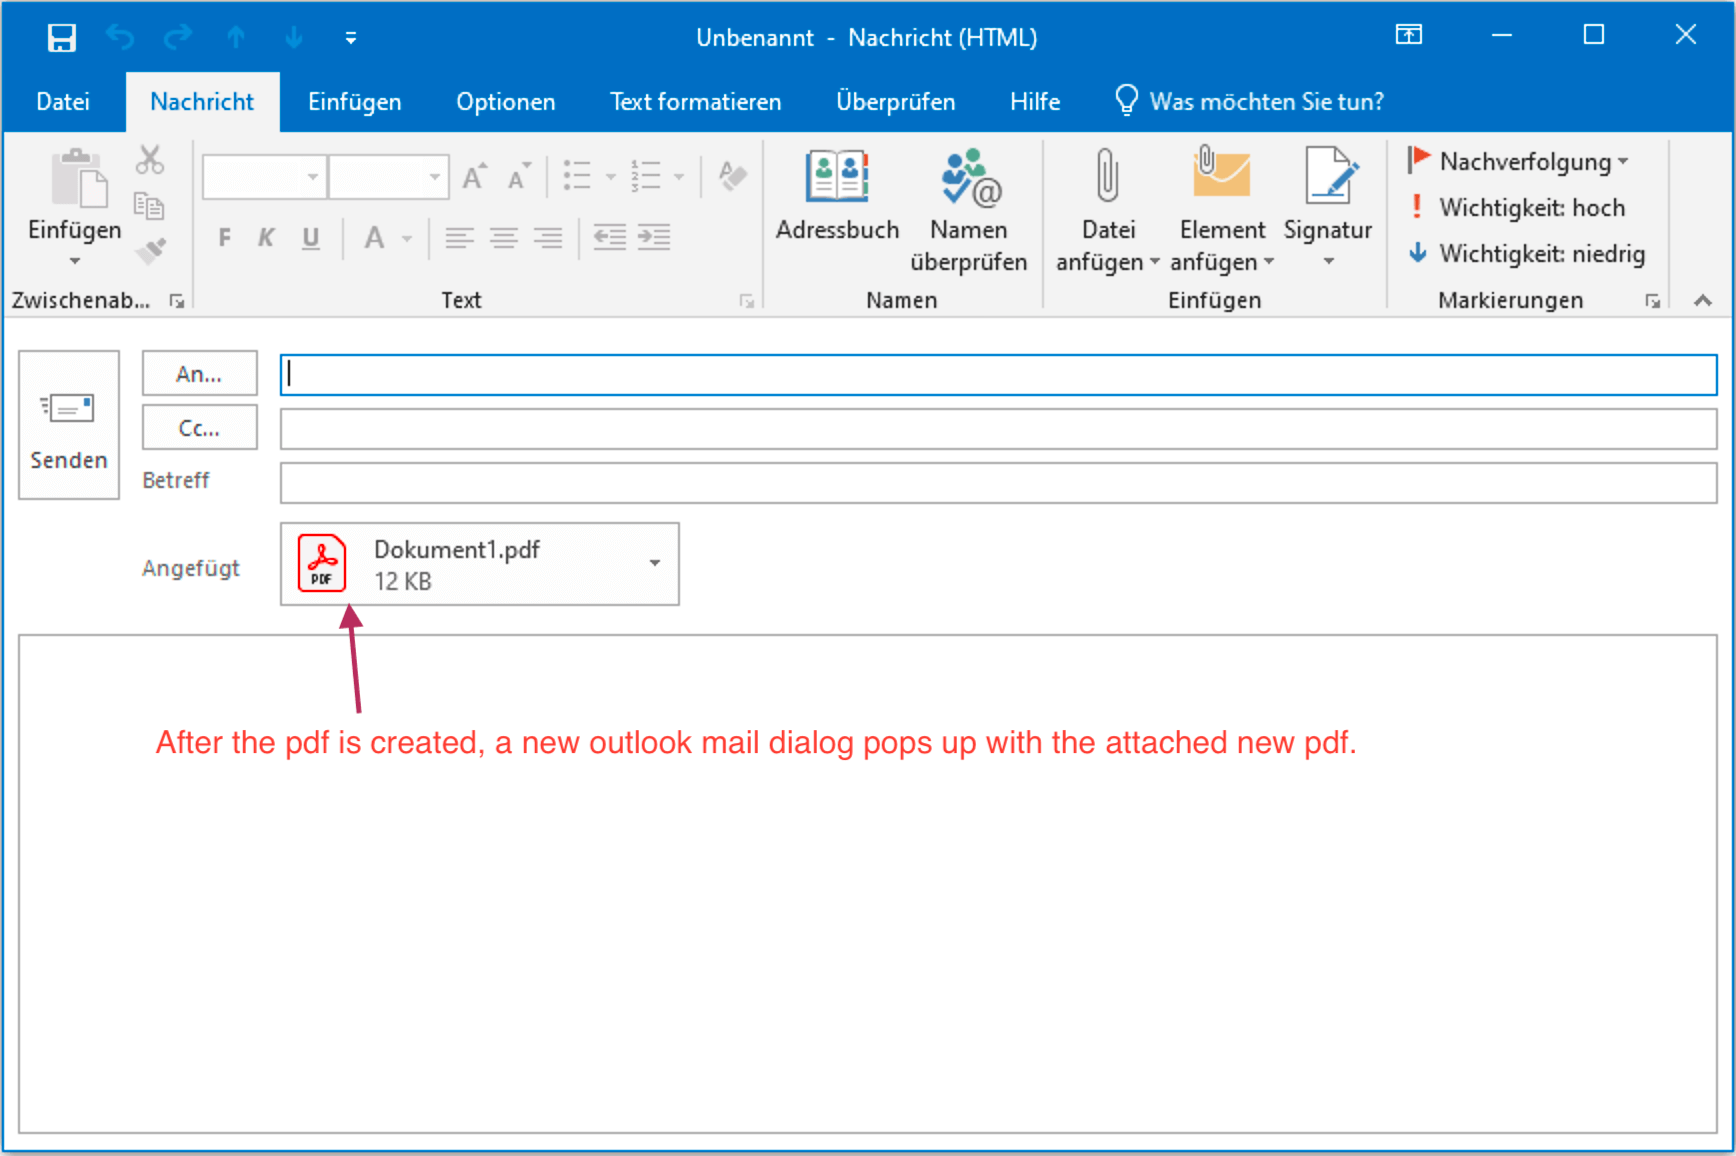 An Outlook e-mail with PDF file attached to the mail